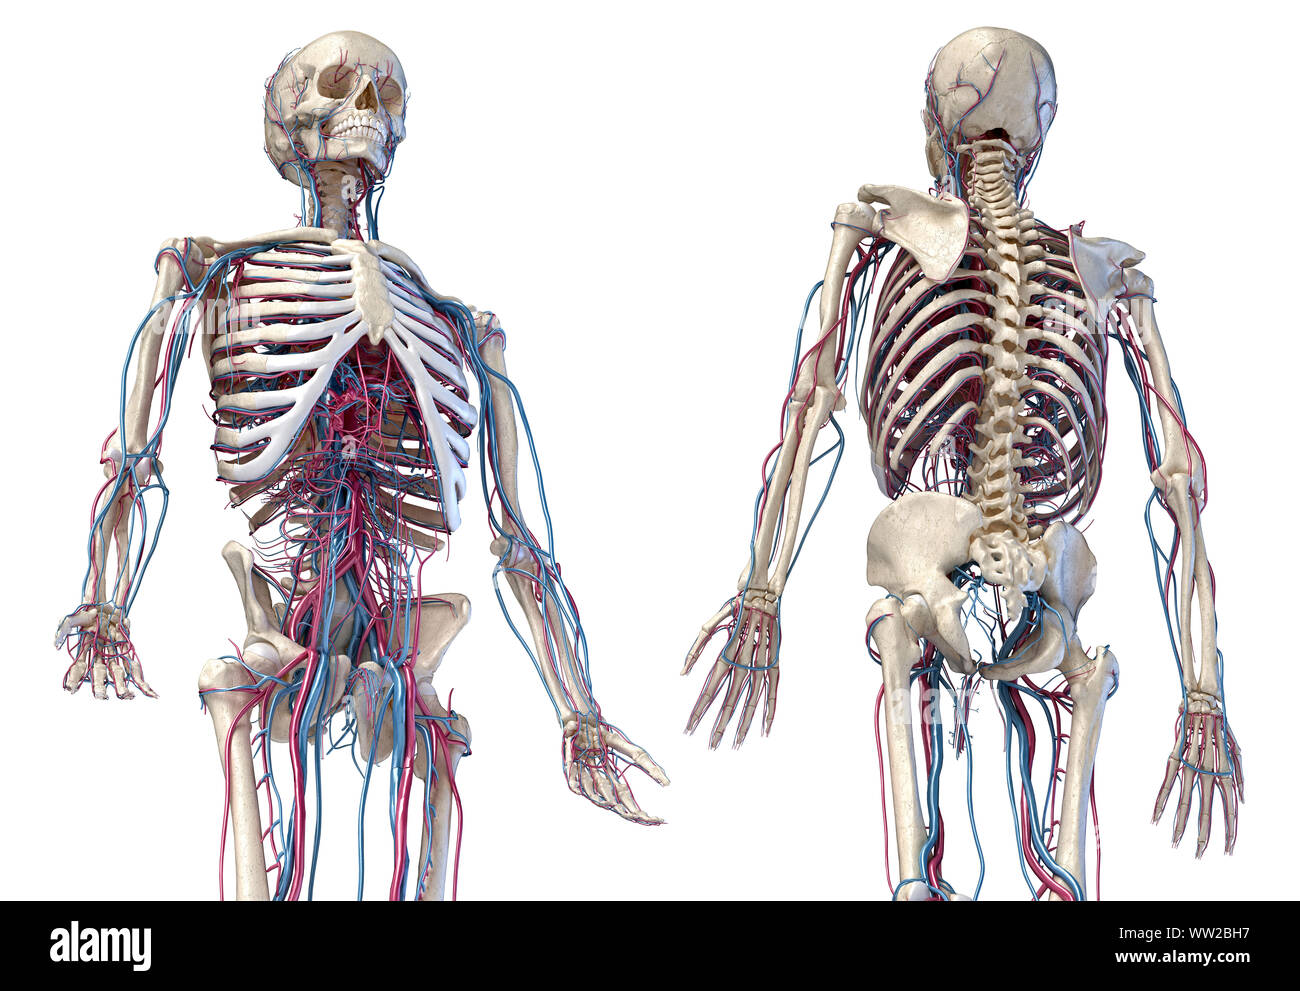 Human anatomy, 3d illustration of the skeleton with cardiovascular system. Perspective view of 3/4 upper part, front and back sides. On white backgrou Stock Photo